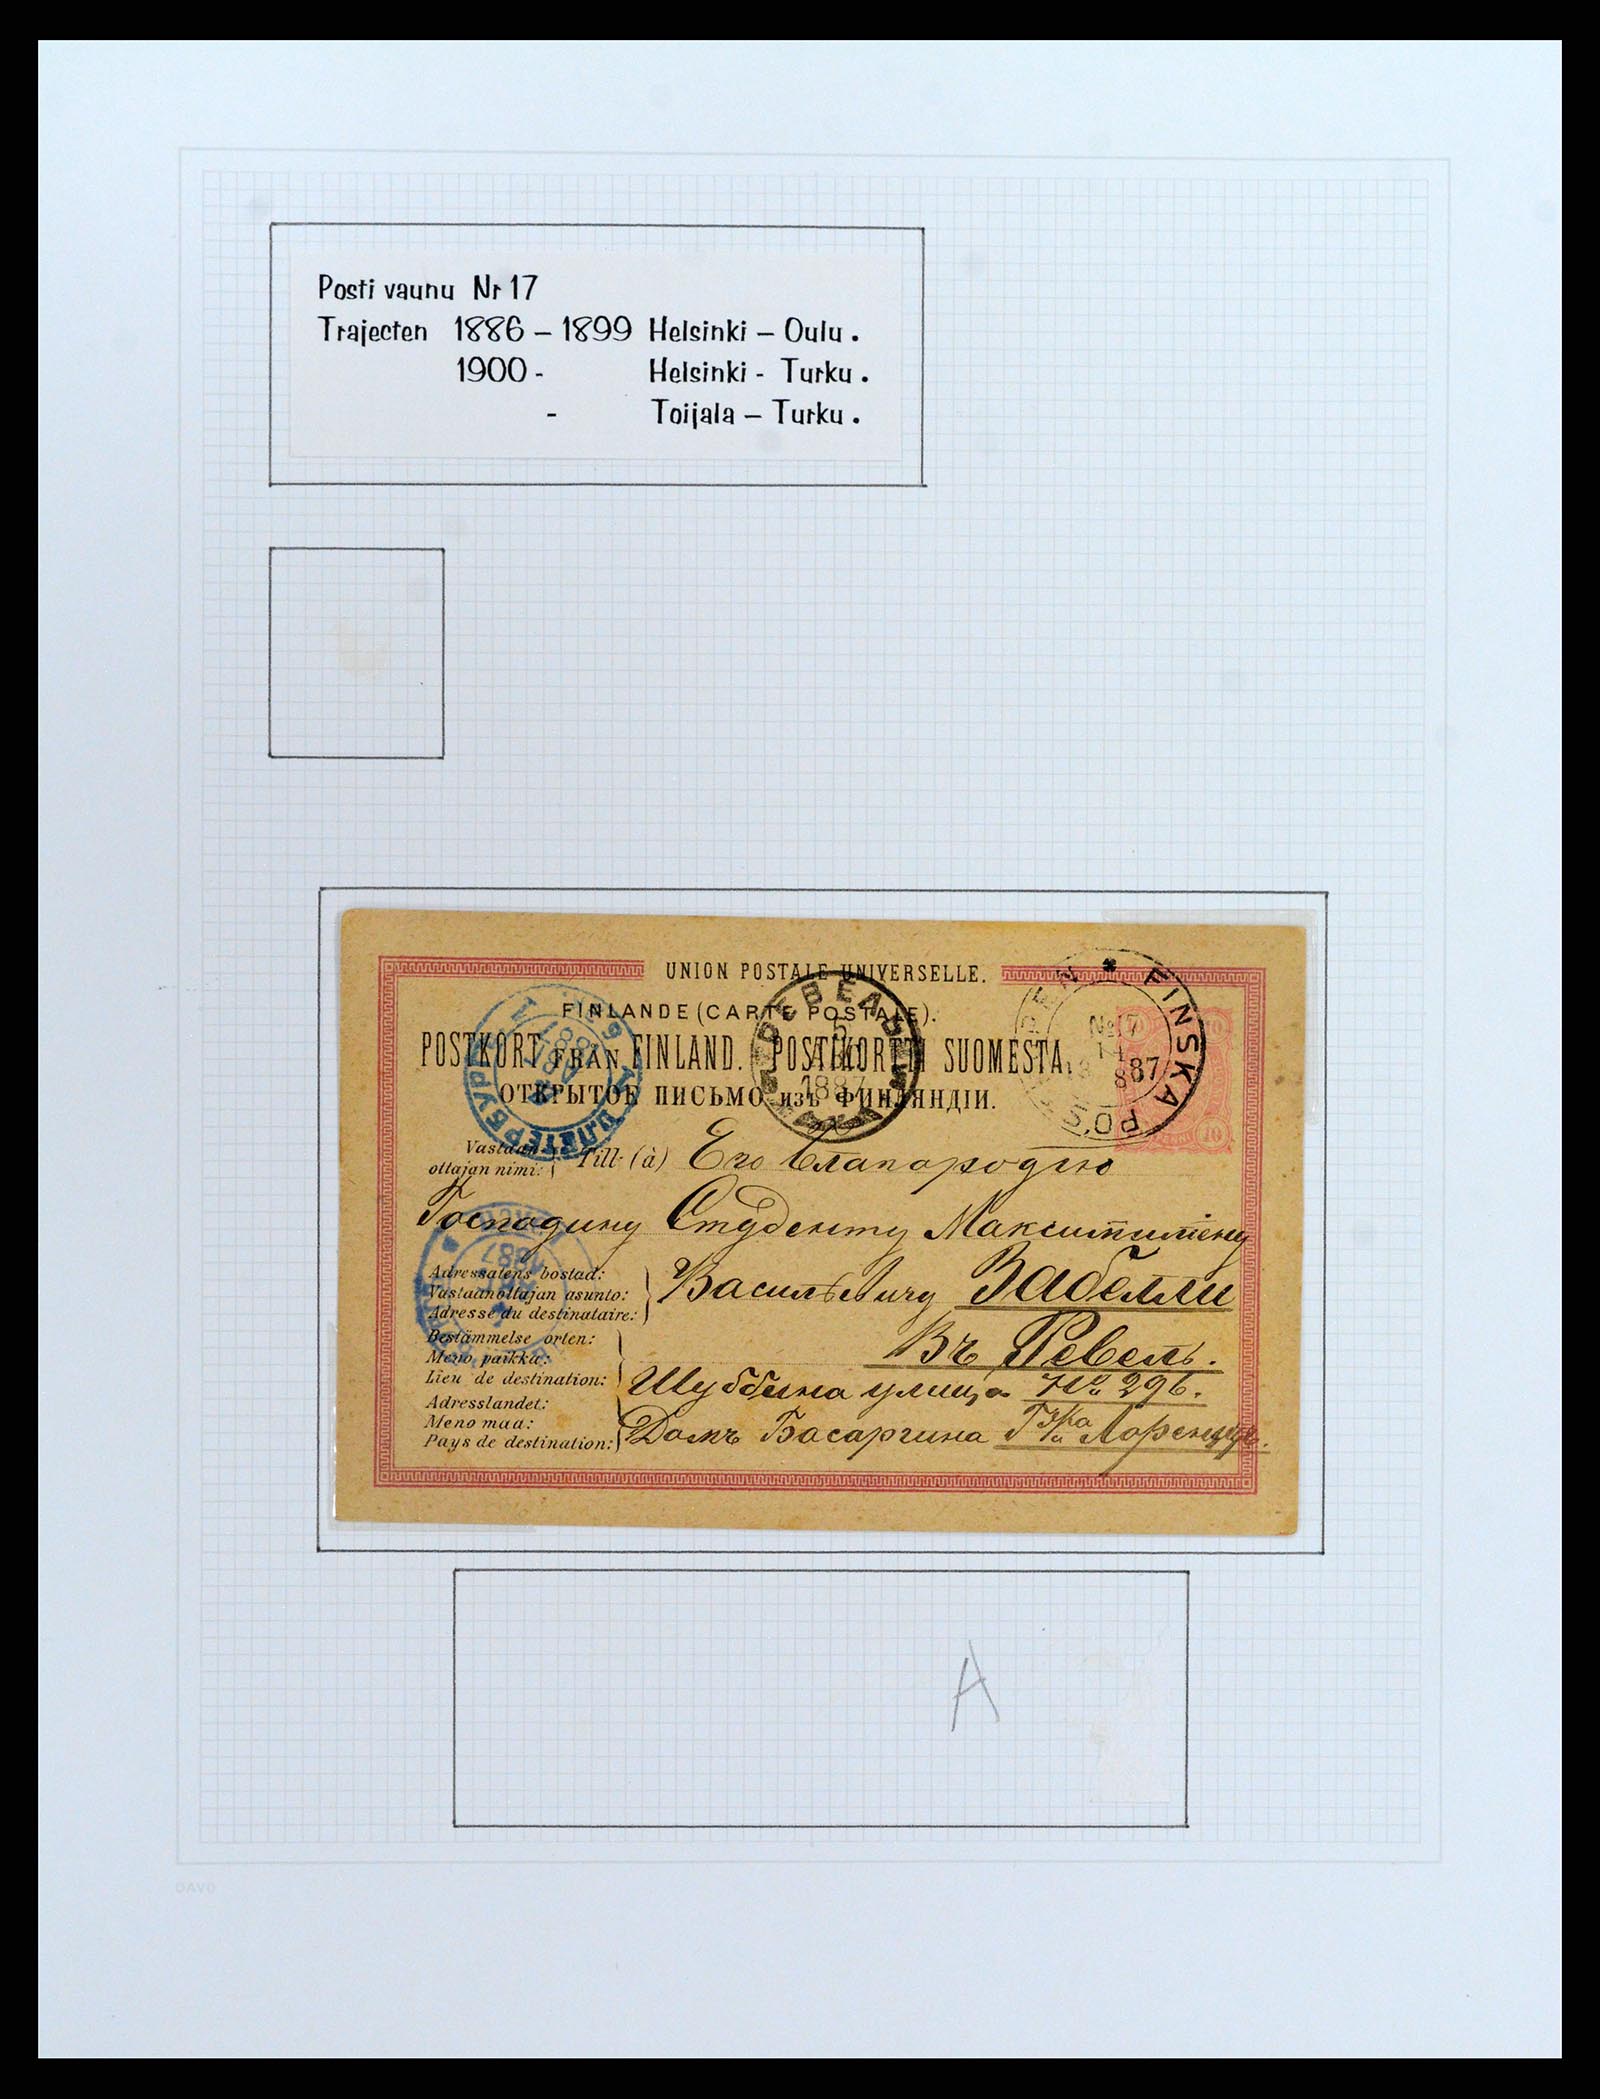 37766 077 - Stamp collection 37766 Finland railway cancellations 1870-1950.